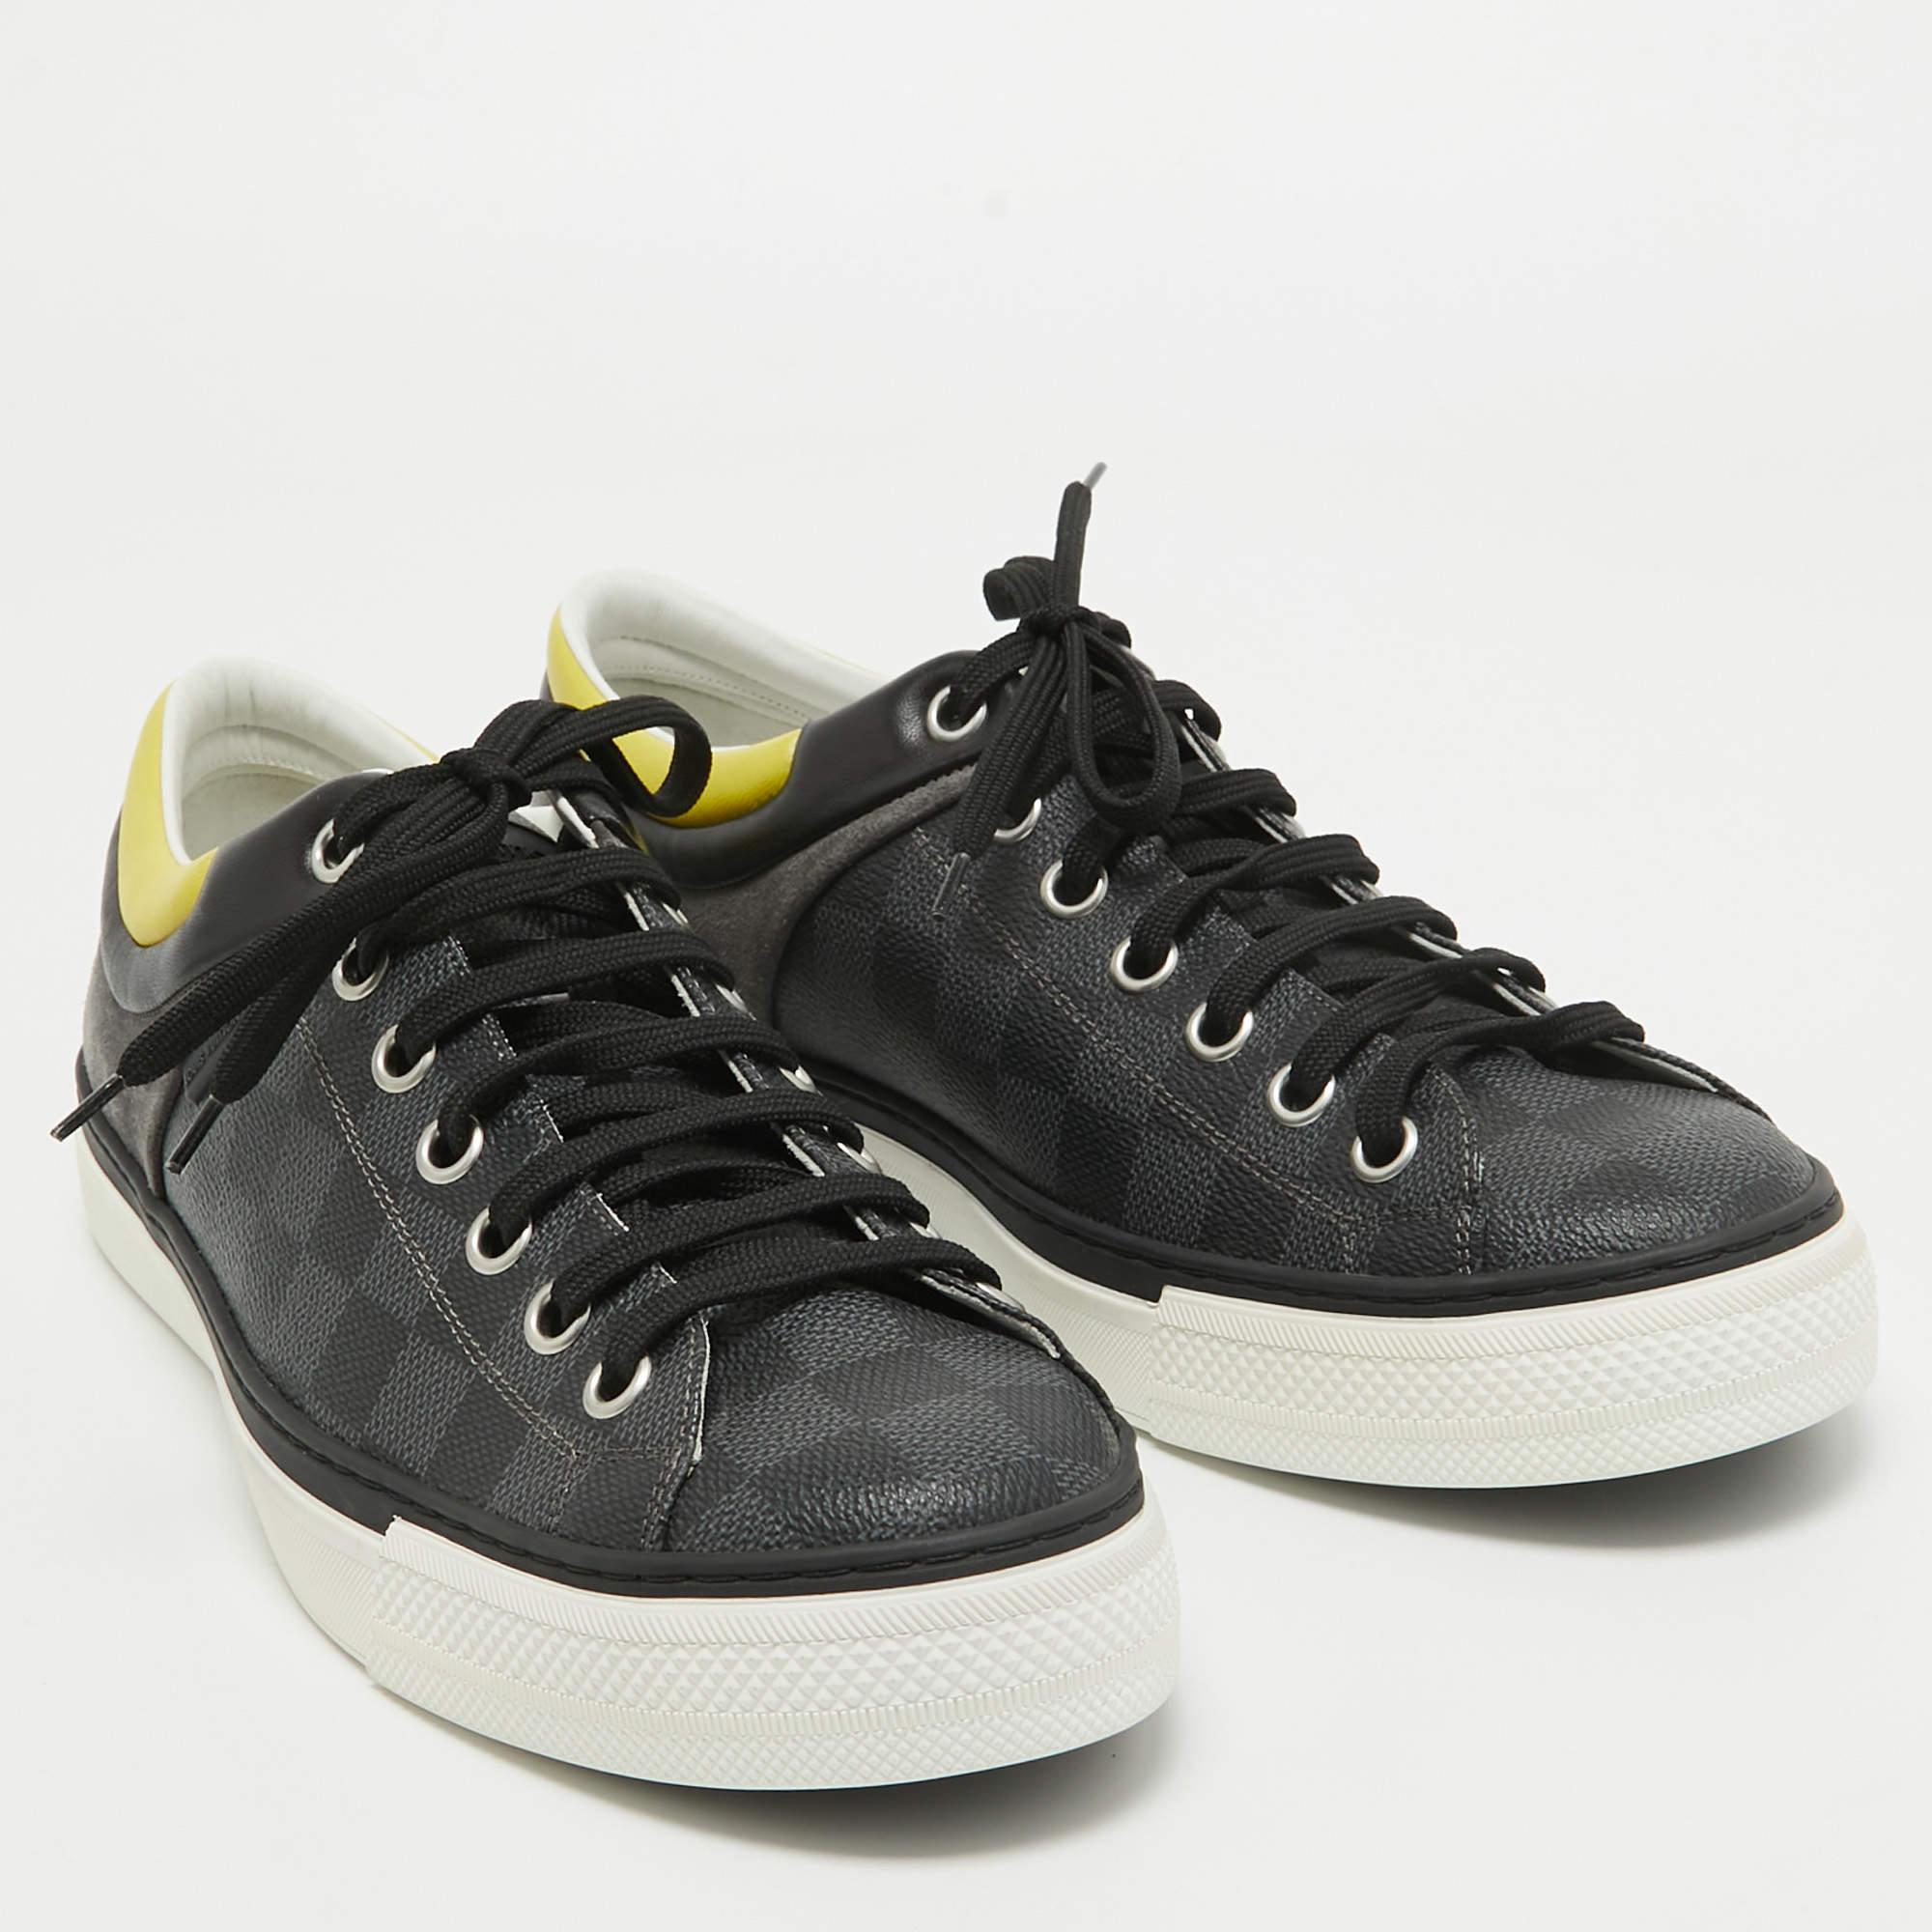 Louis Vuitton Black Canvas and Suede Graphite Low Top Sneakers Size 42.5 For Sale 1